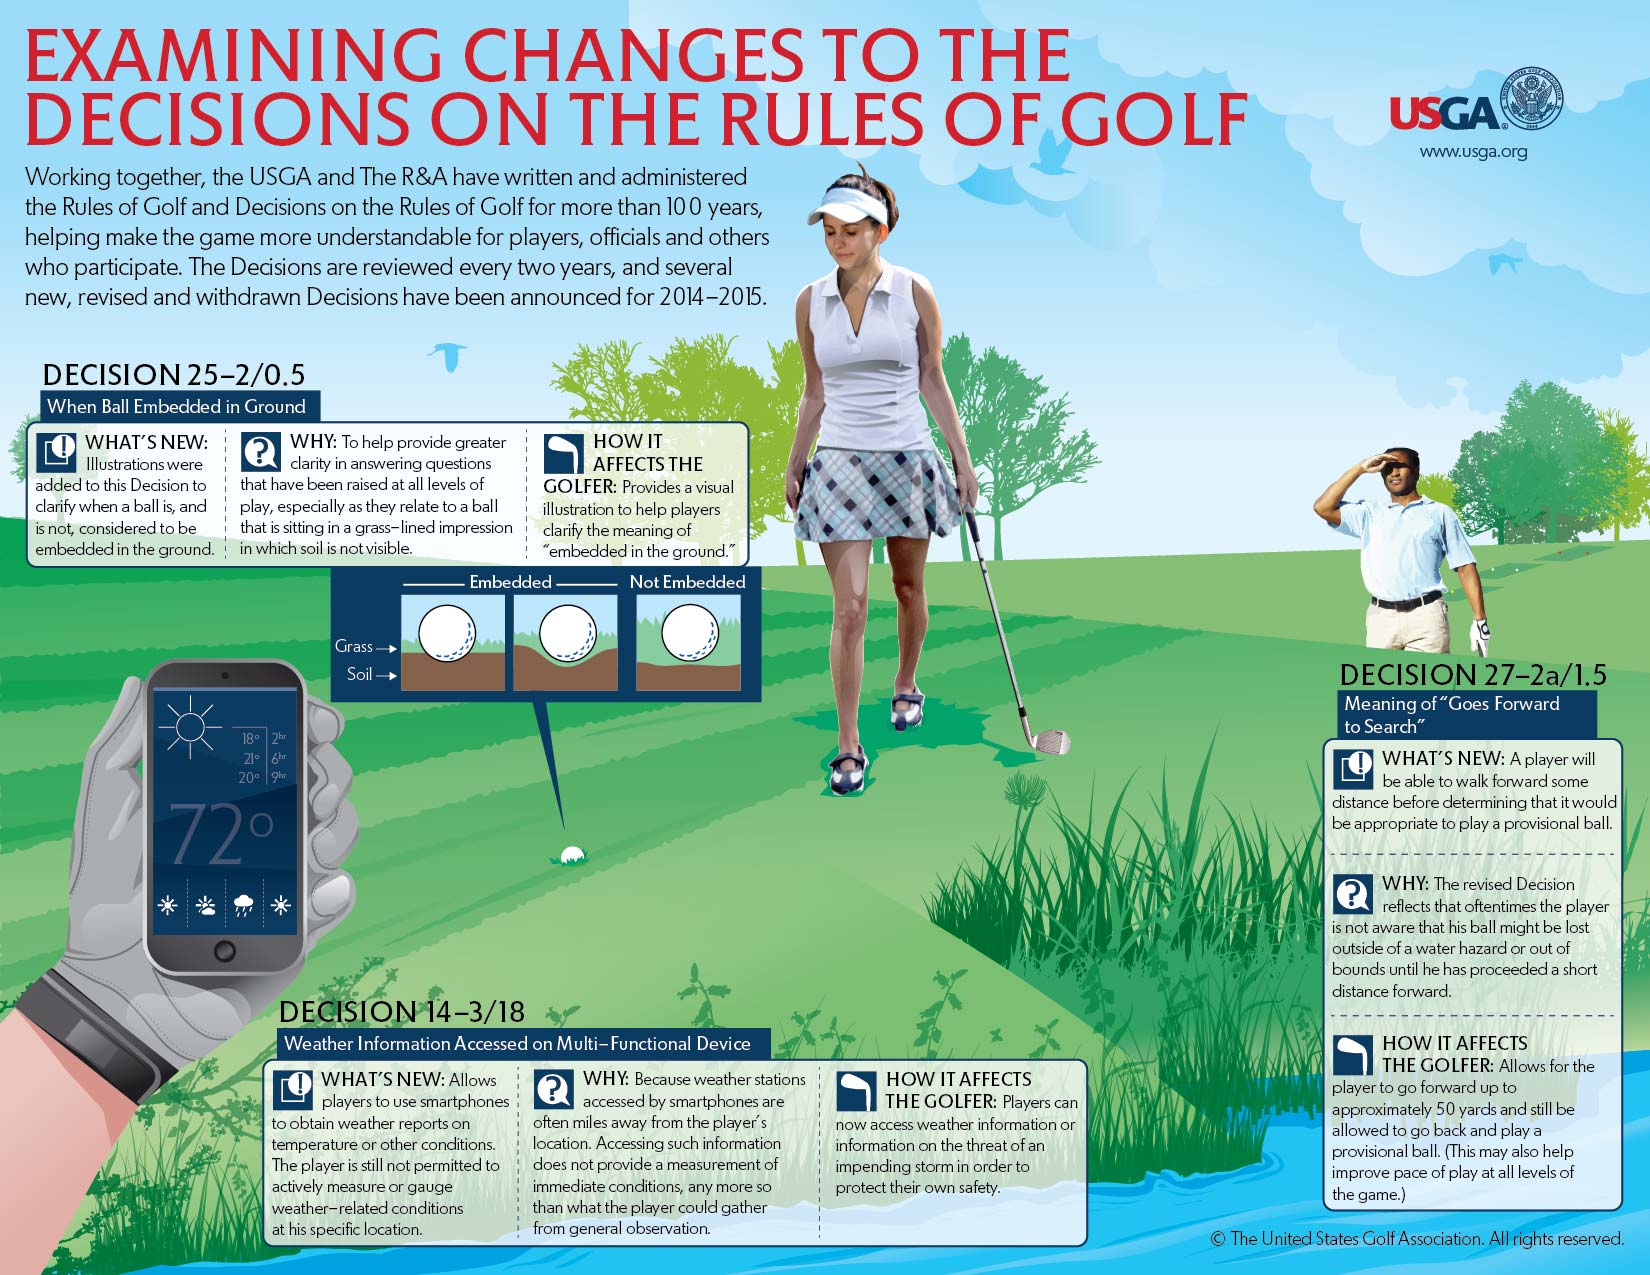 The USGA and The R&A announce changes to "Decisions on the